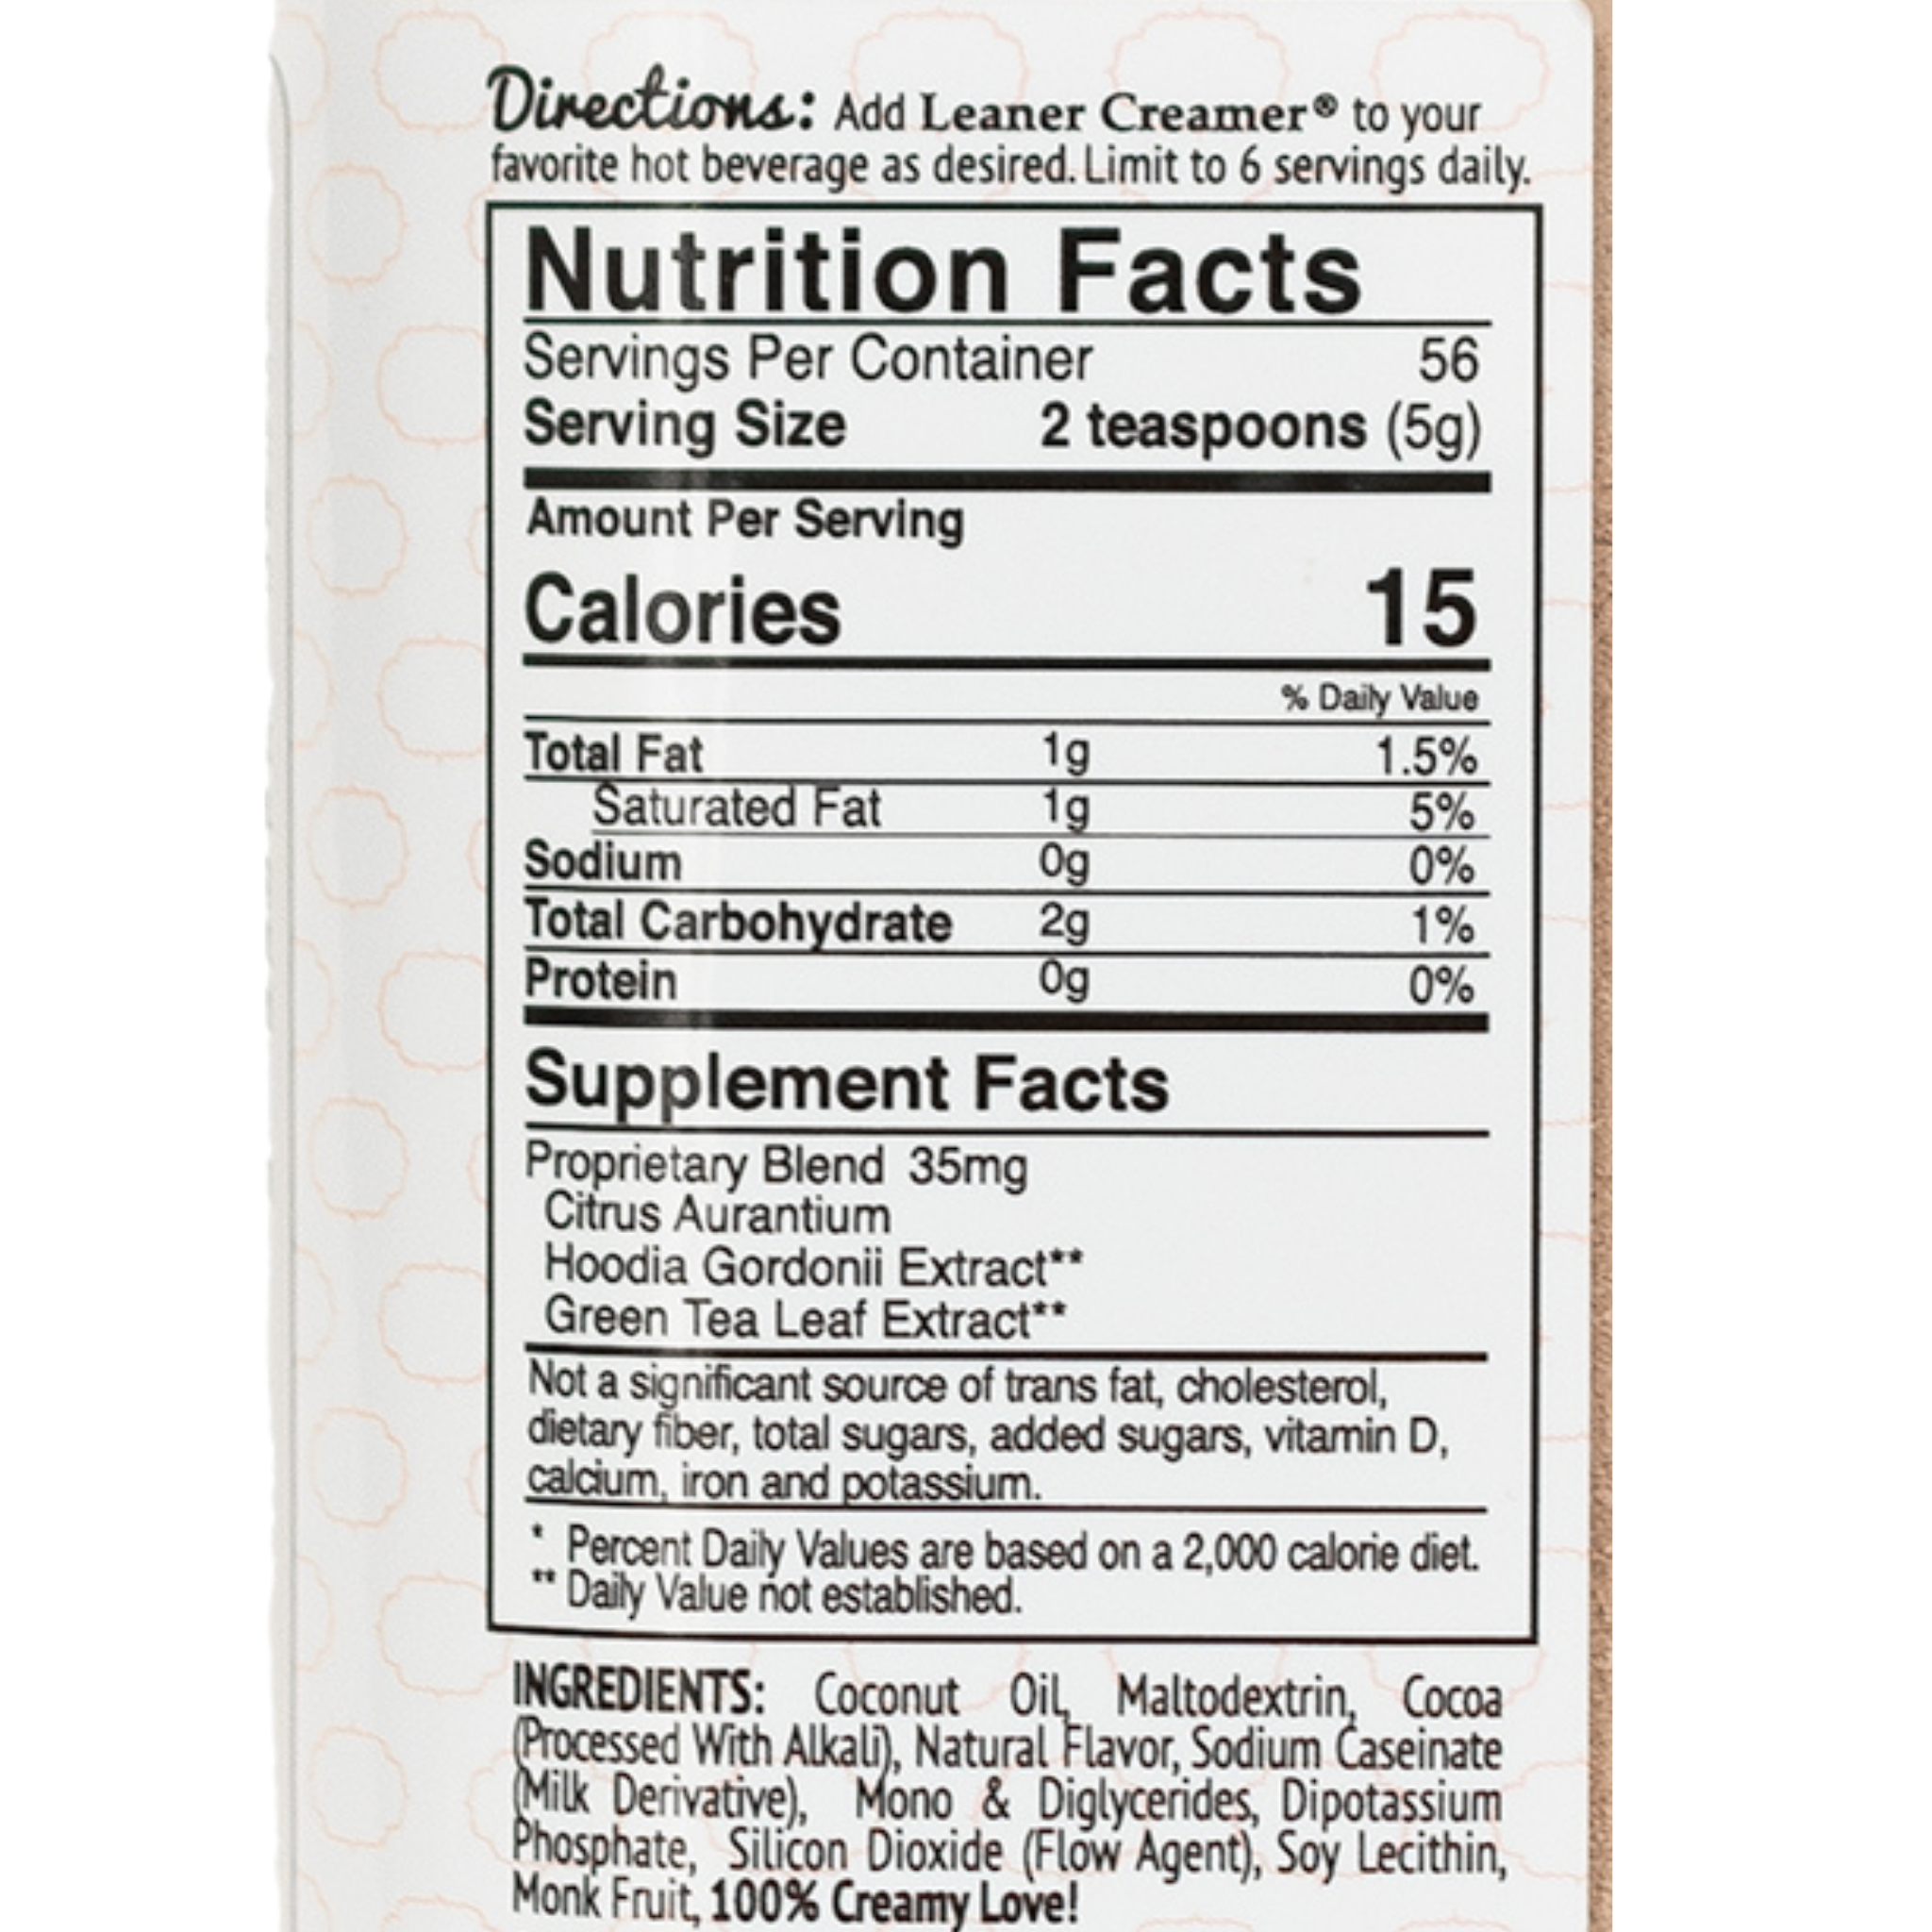 Nutrition Facts for NUTELLEANA LIMITED EDITION by Leaner Creamer